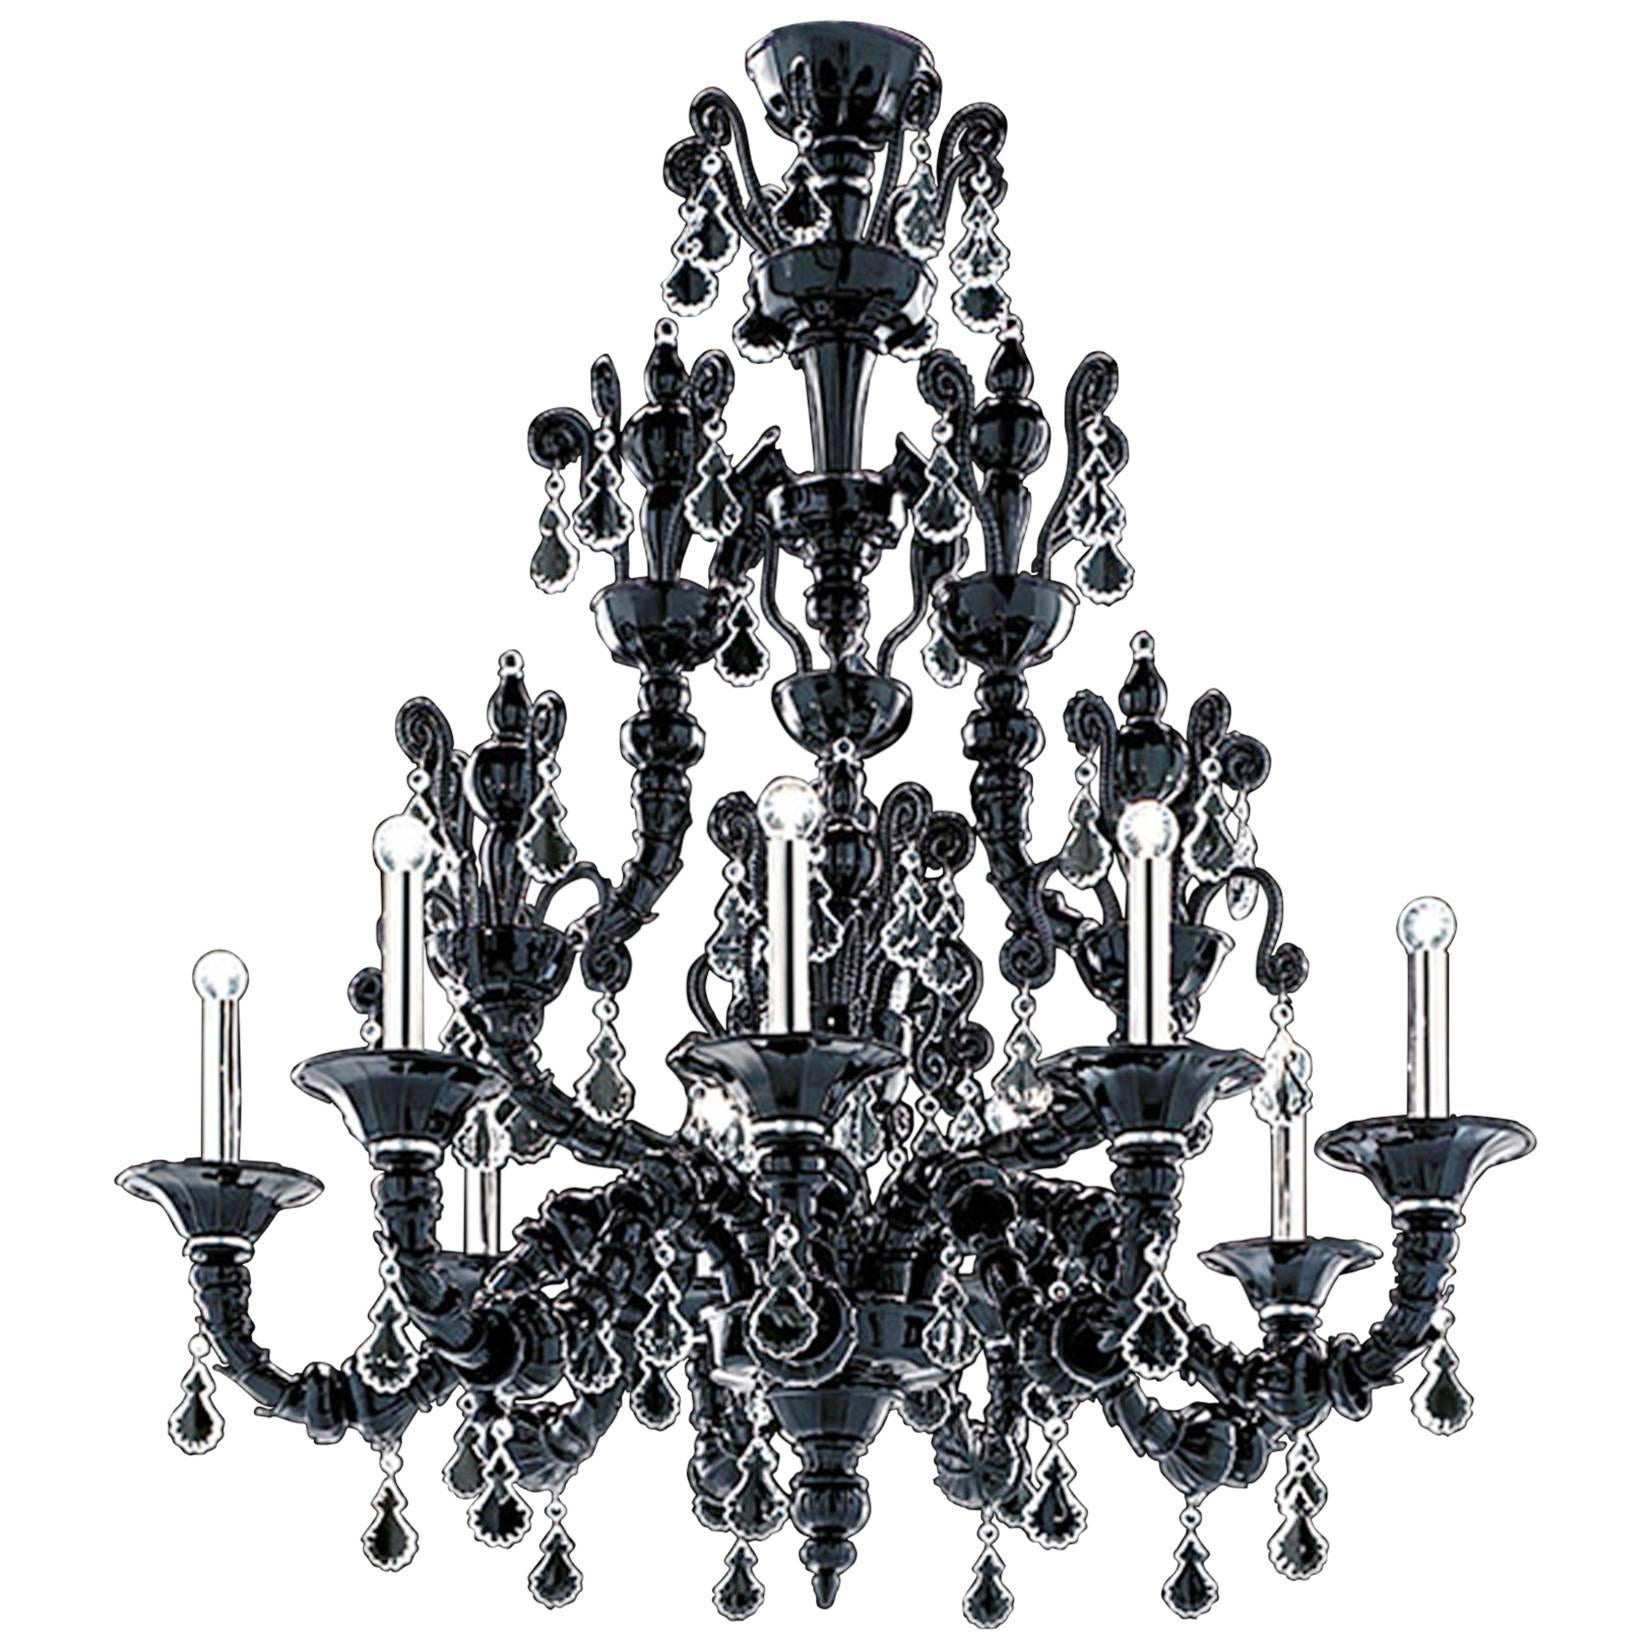 Monumental Barovier & Toso "Taif" Chandelier For Sale